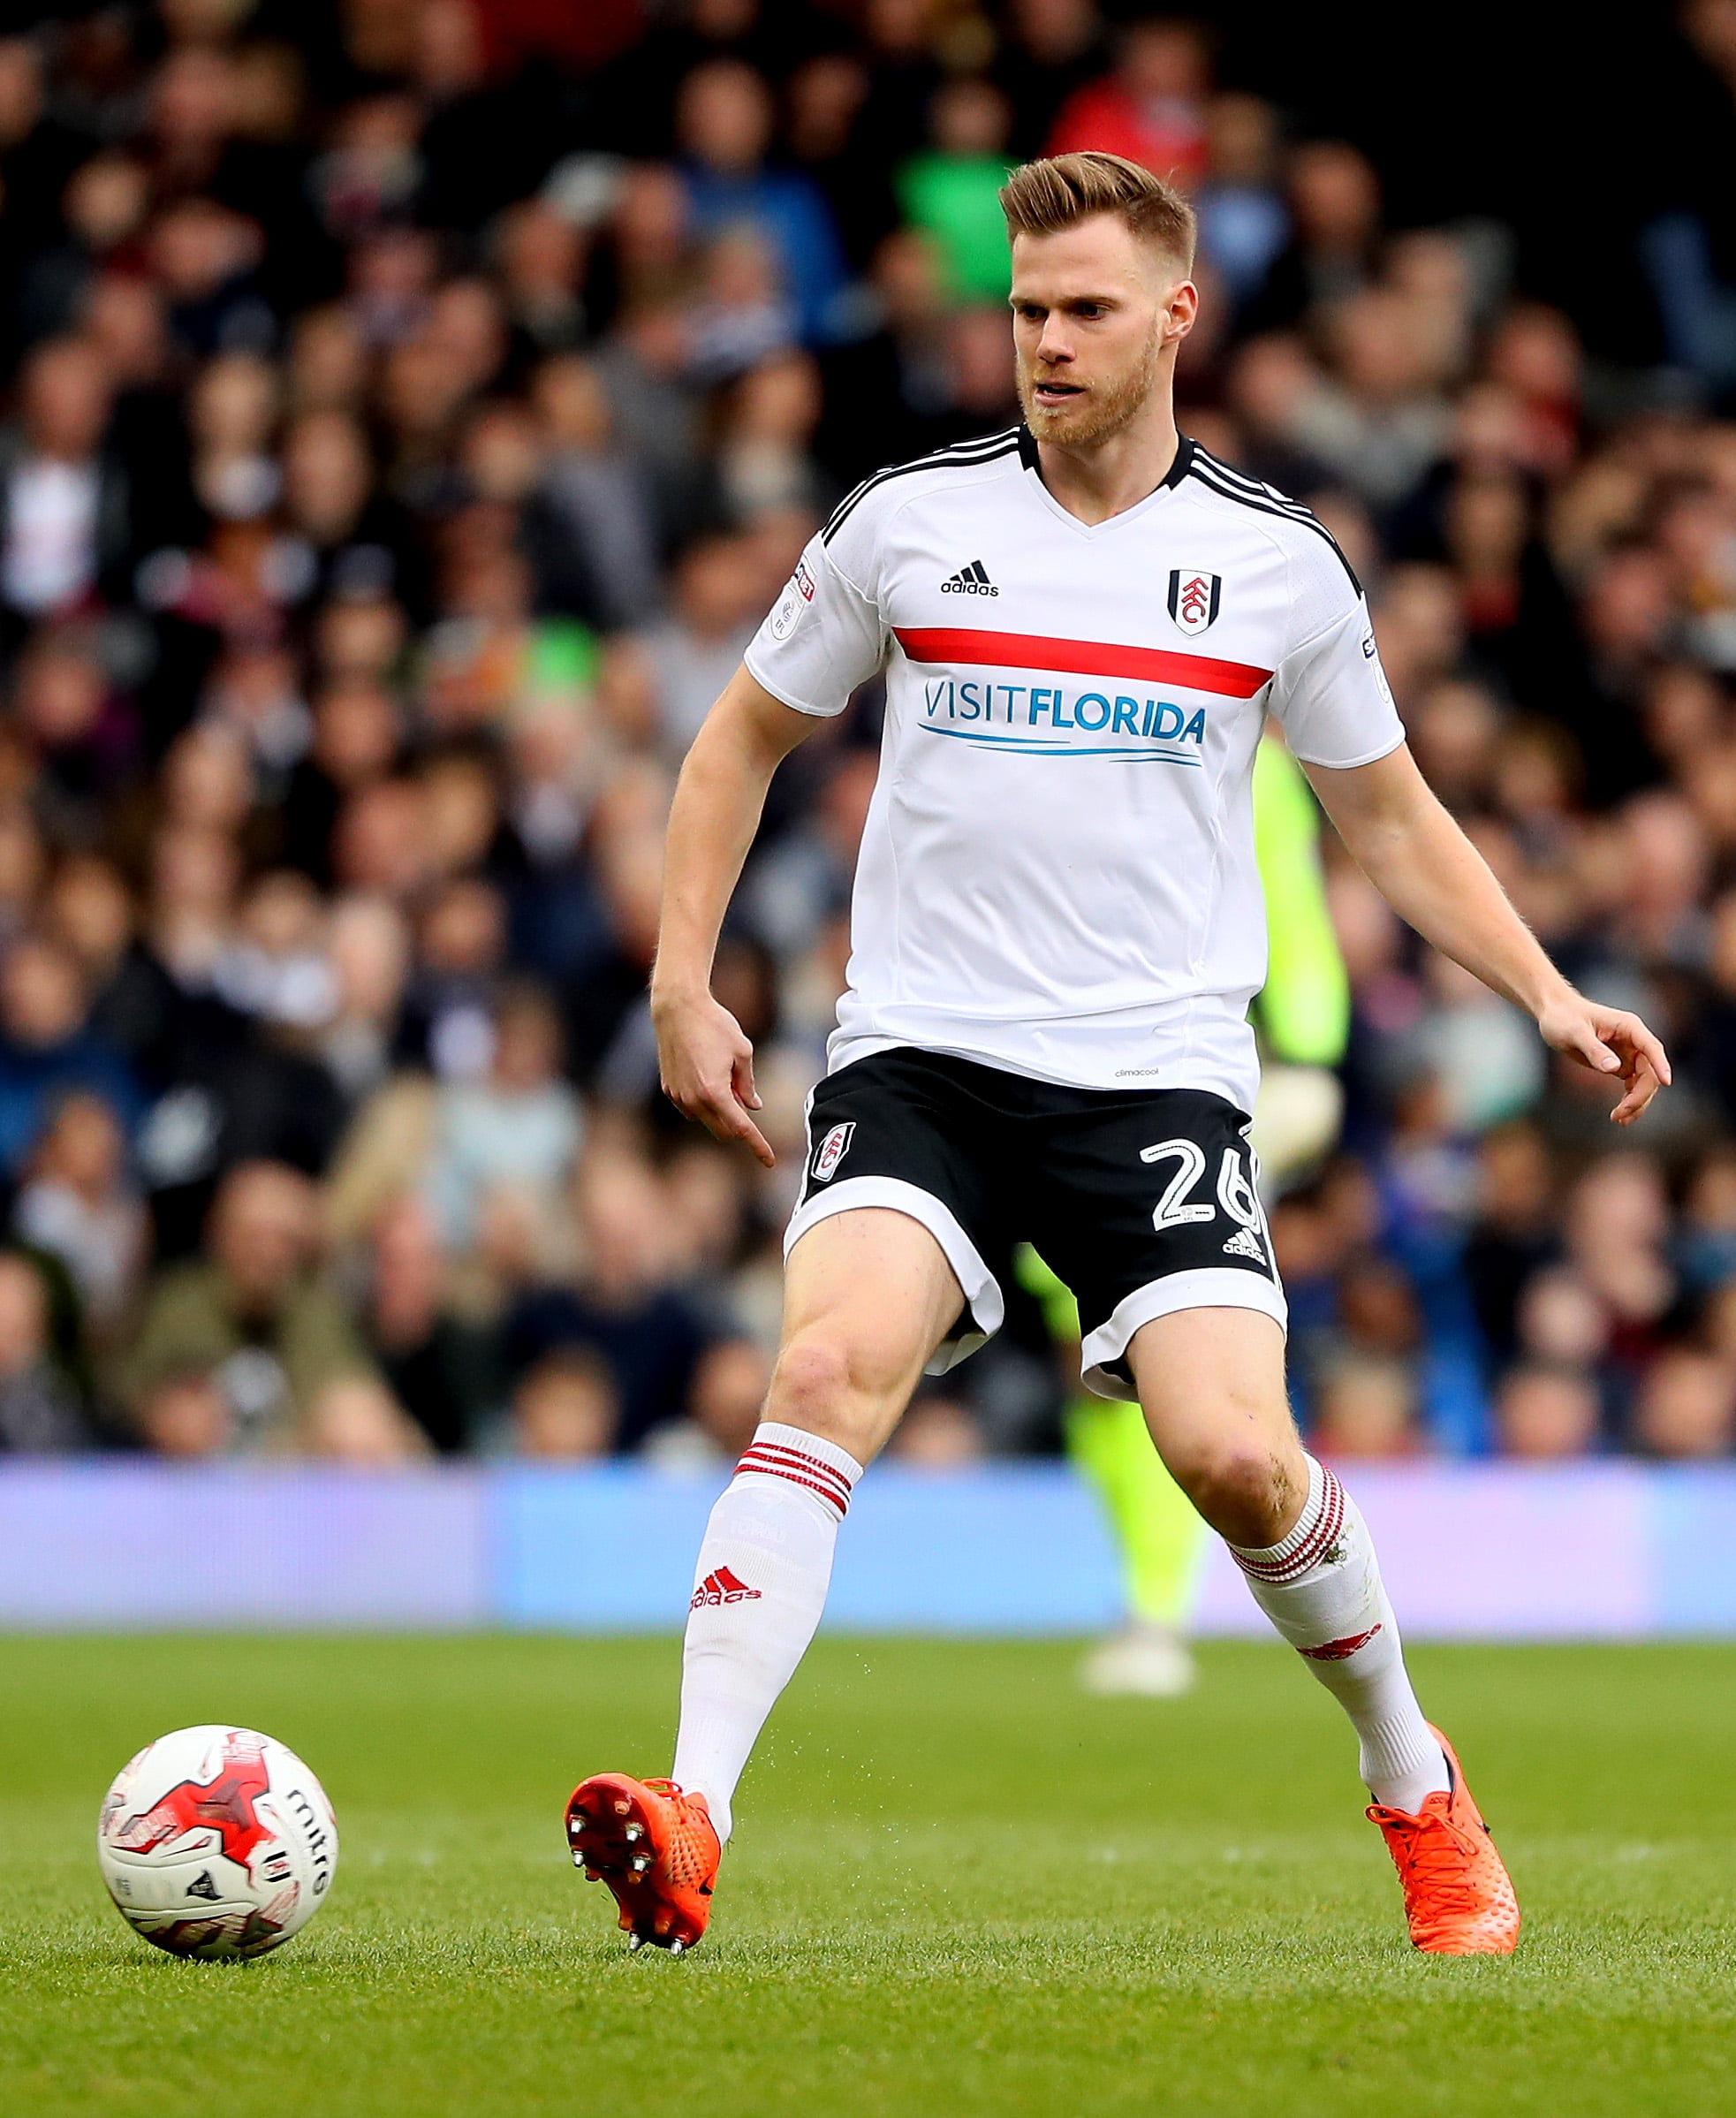 LONDON, ENGLAND - MARCH 18:  Tomas Kalas of Fulham in action during the Sky Bet Championship match between Fulham and Wolverhampton Wanderers at Craven Cottage on March 18, 2017 in London, England.  (Photo by Andrew Redington/Getty Images)